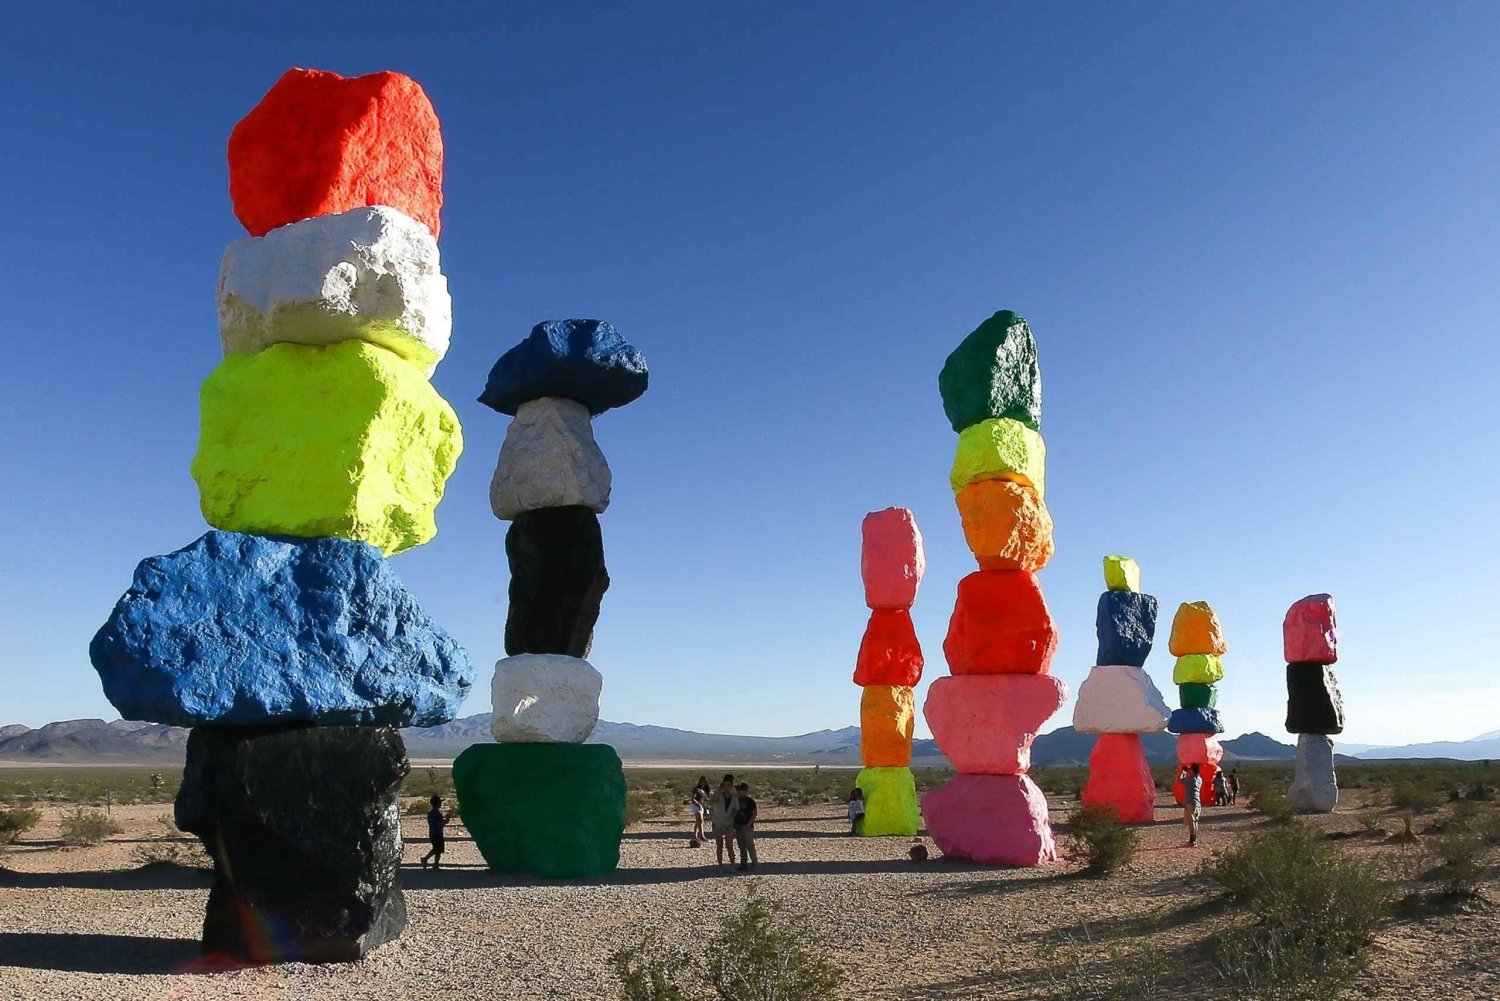 Seven Magic Mountains & Las Vegas Sign - Photoshoot Included